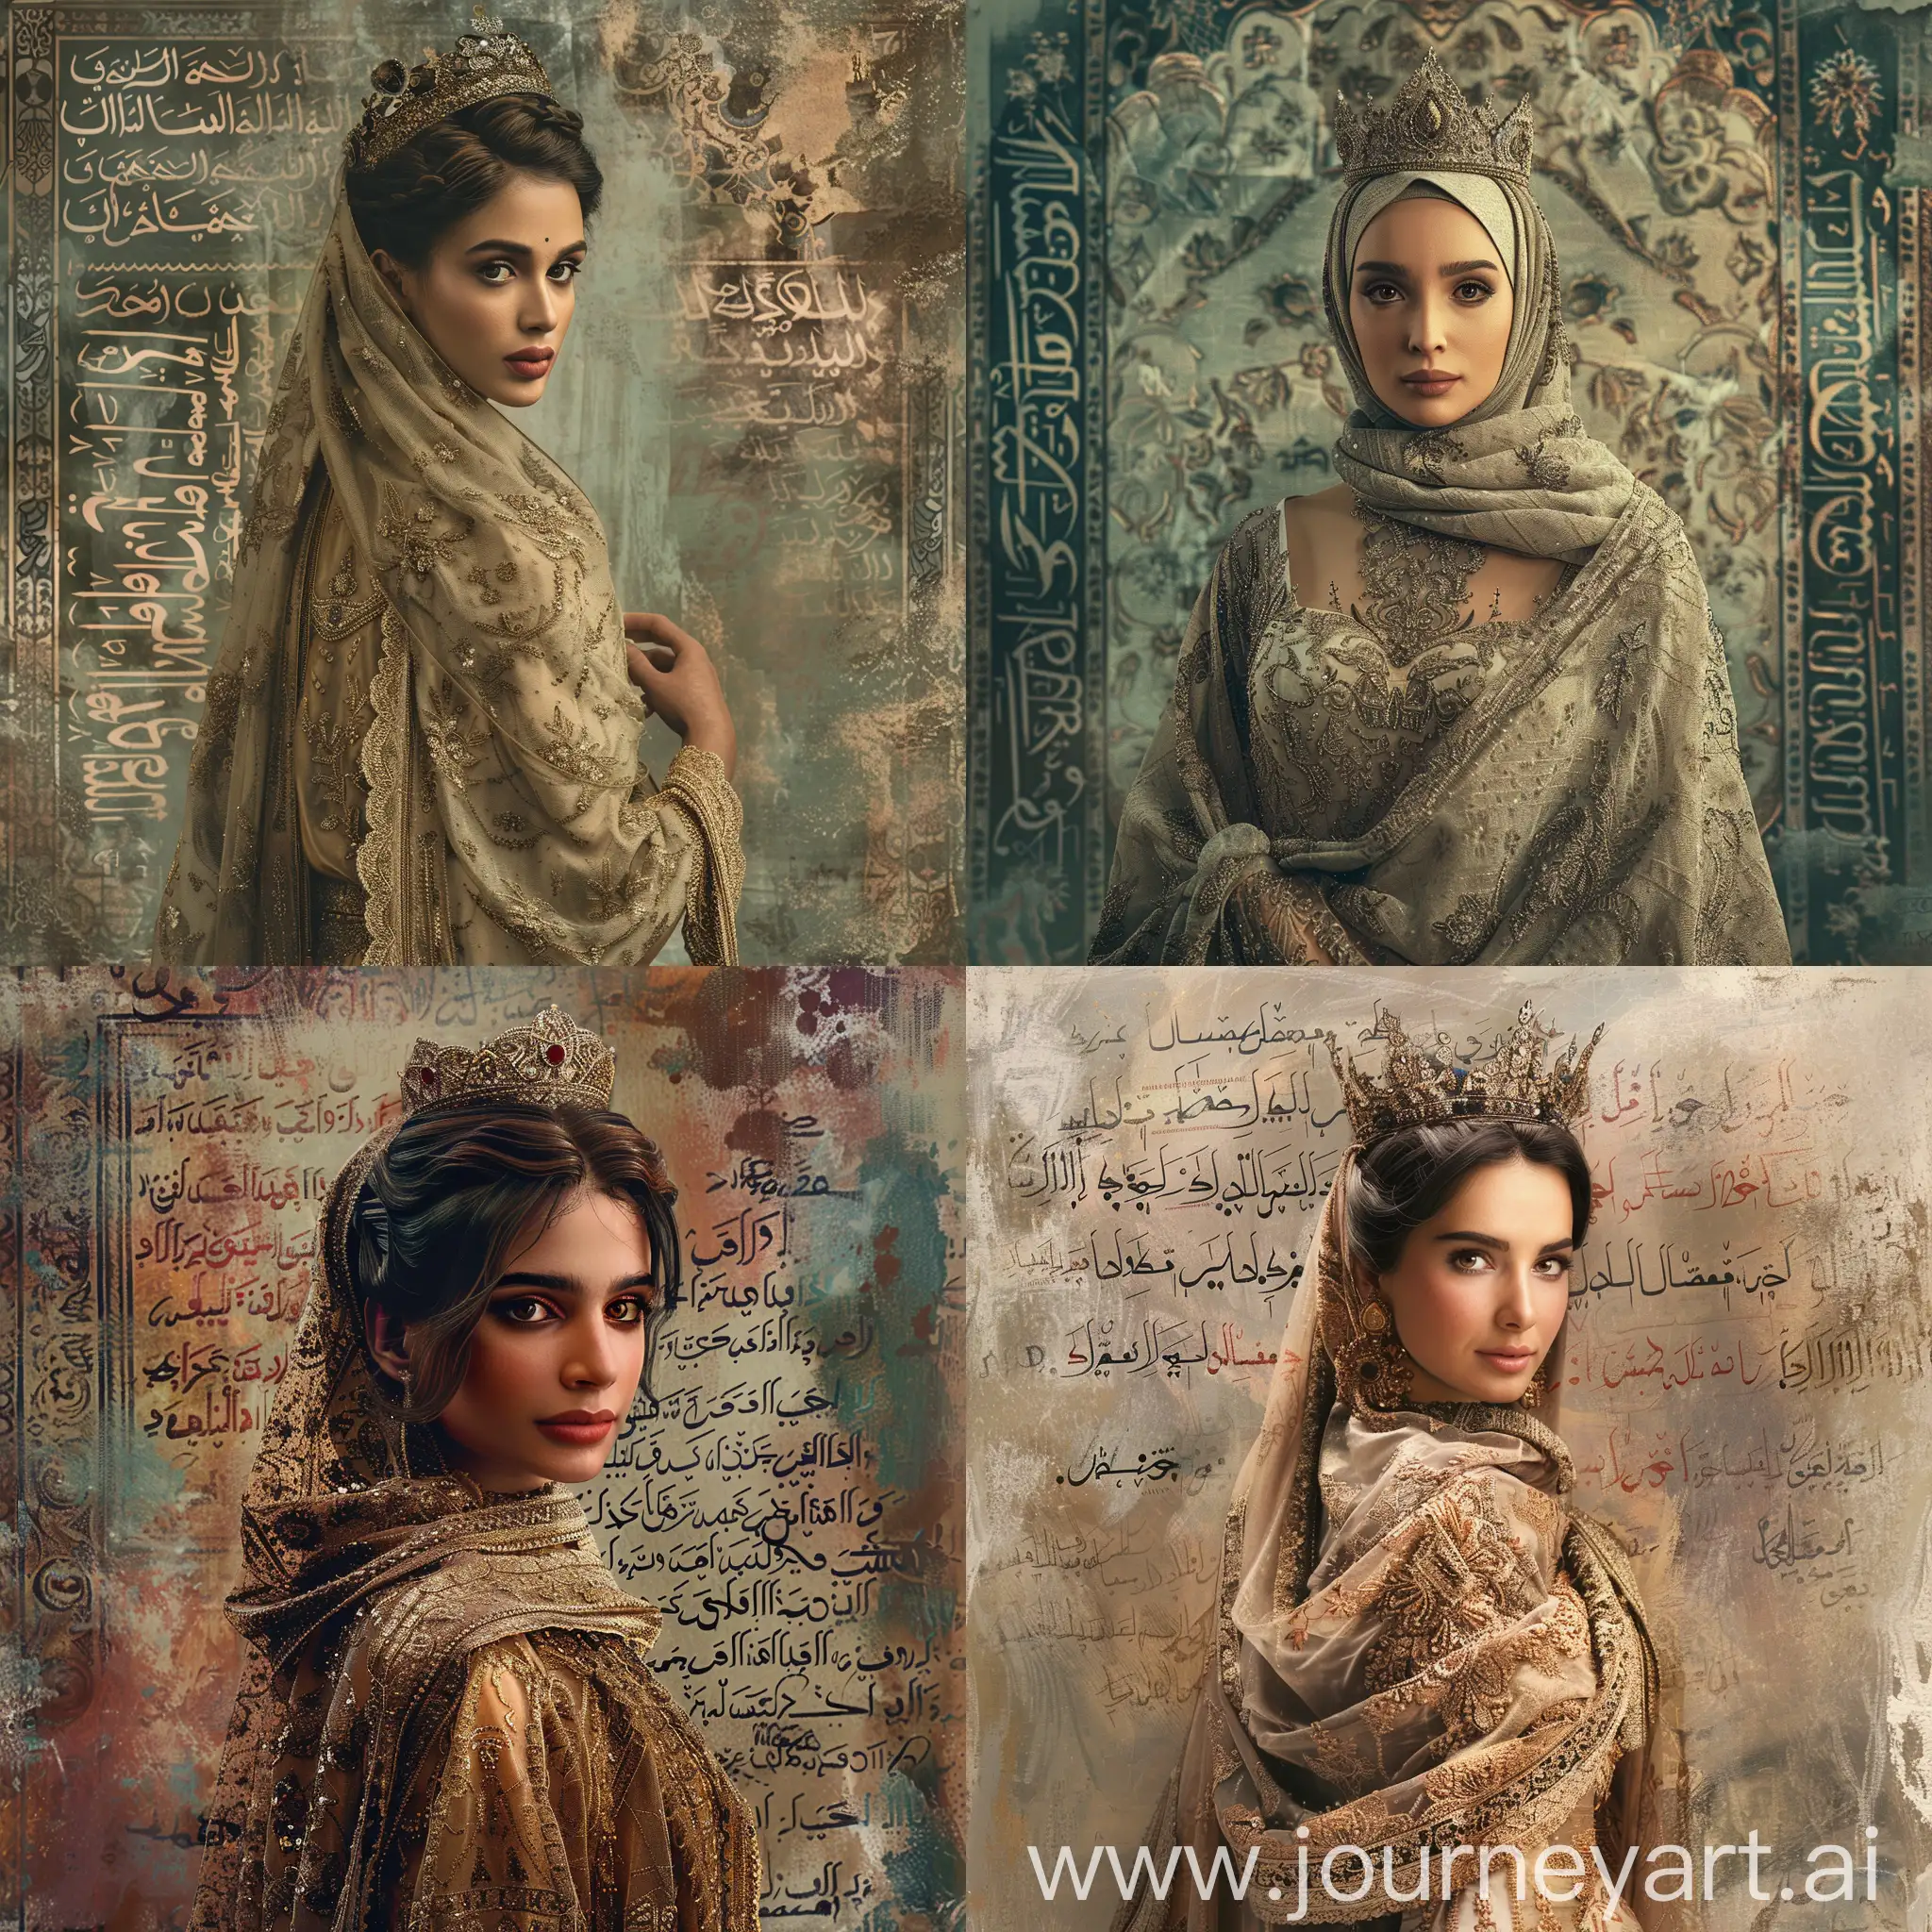 A stunning cinematic 3D rendering portraying an elegantly dressed muslimah from the past, with a captivating expression and a confident posture. The muslimah is wearing a beautiful, intricately designed dress that appears to be from the early 20th century. Her shawl and crown is styled in a vintage updo, adorned with an elegant looks. The background is a blend of art styles, featuring a mesmerizing blend of photography, painting, fashion, typography, and illustration. The overall effect is a visually stunning and emotionally evocative piece that combines elements of romance and nostalgia., photo, illustration, painting, cinematic, 3d render, fashion, typography